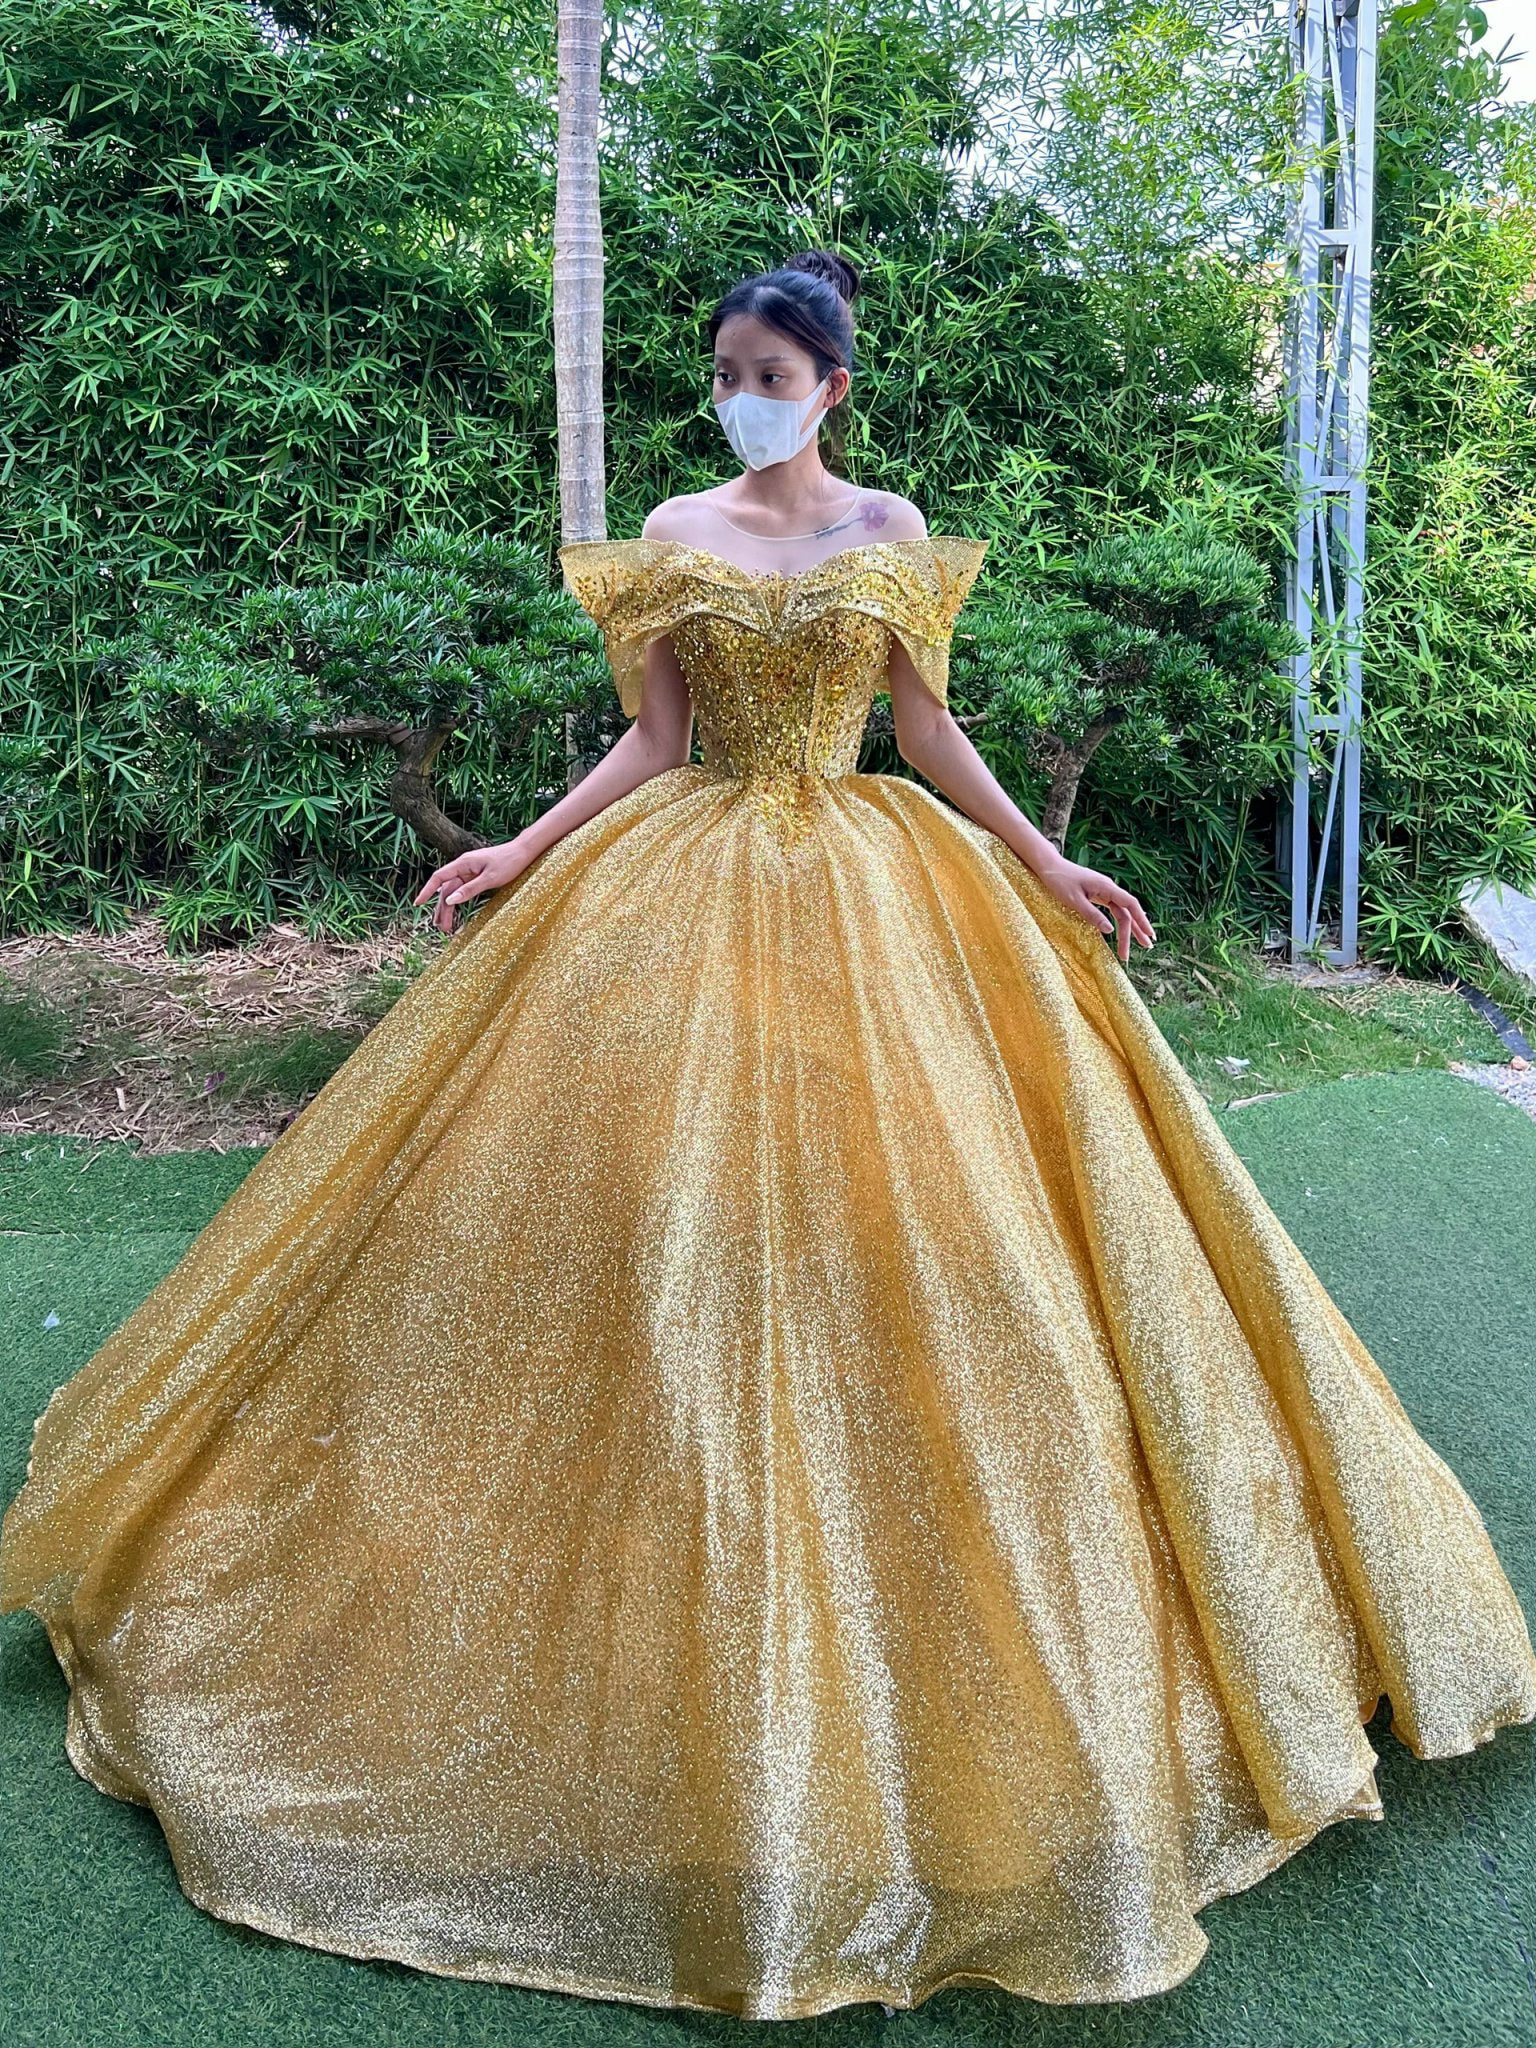 Yellow Tulle A-line One Shoulder Lace Prom Dresses MP719 | Musebridals